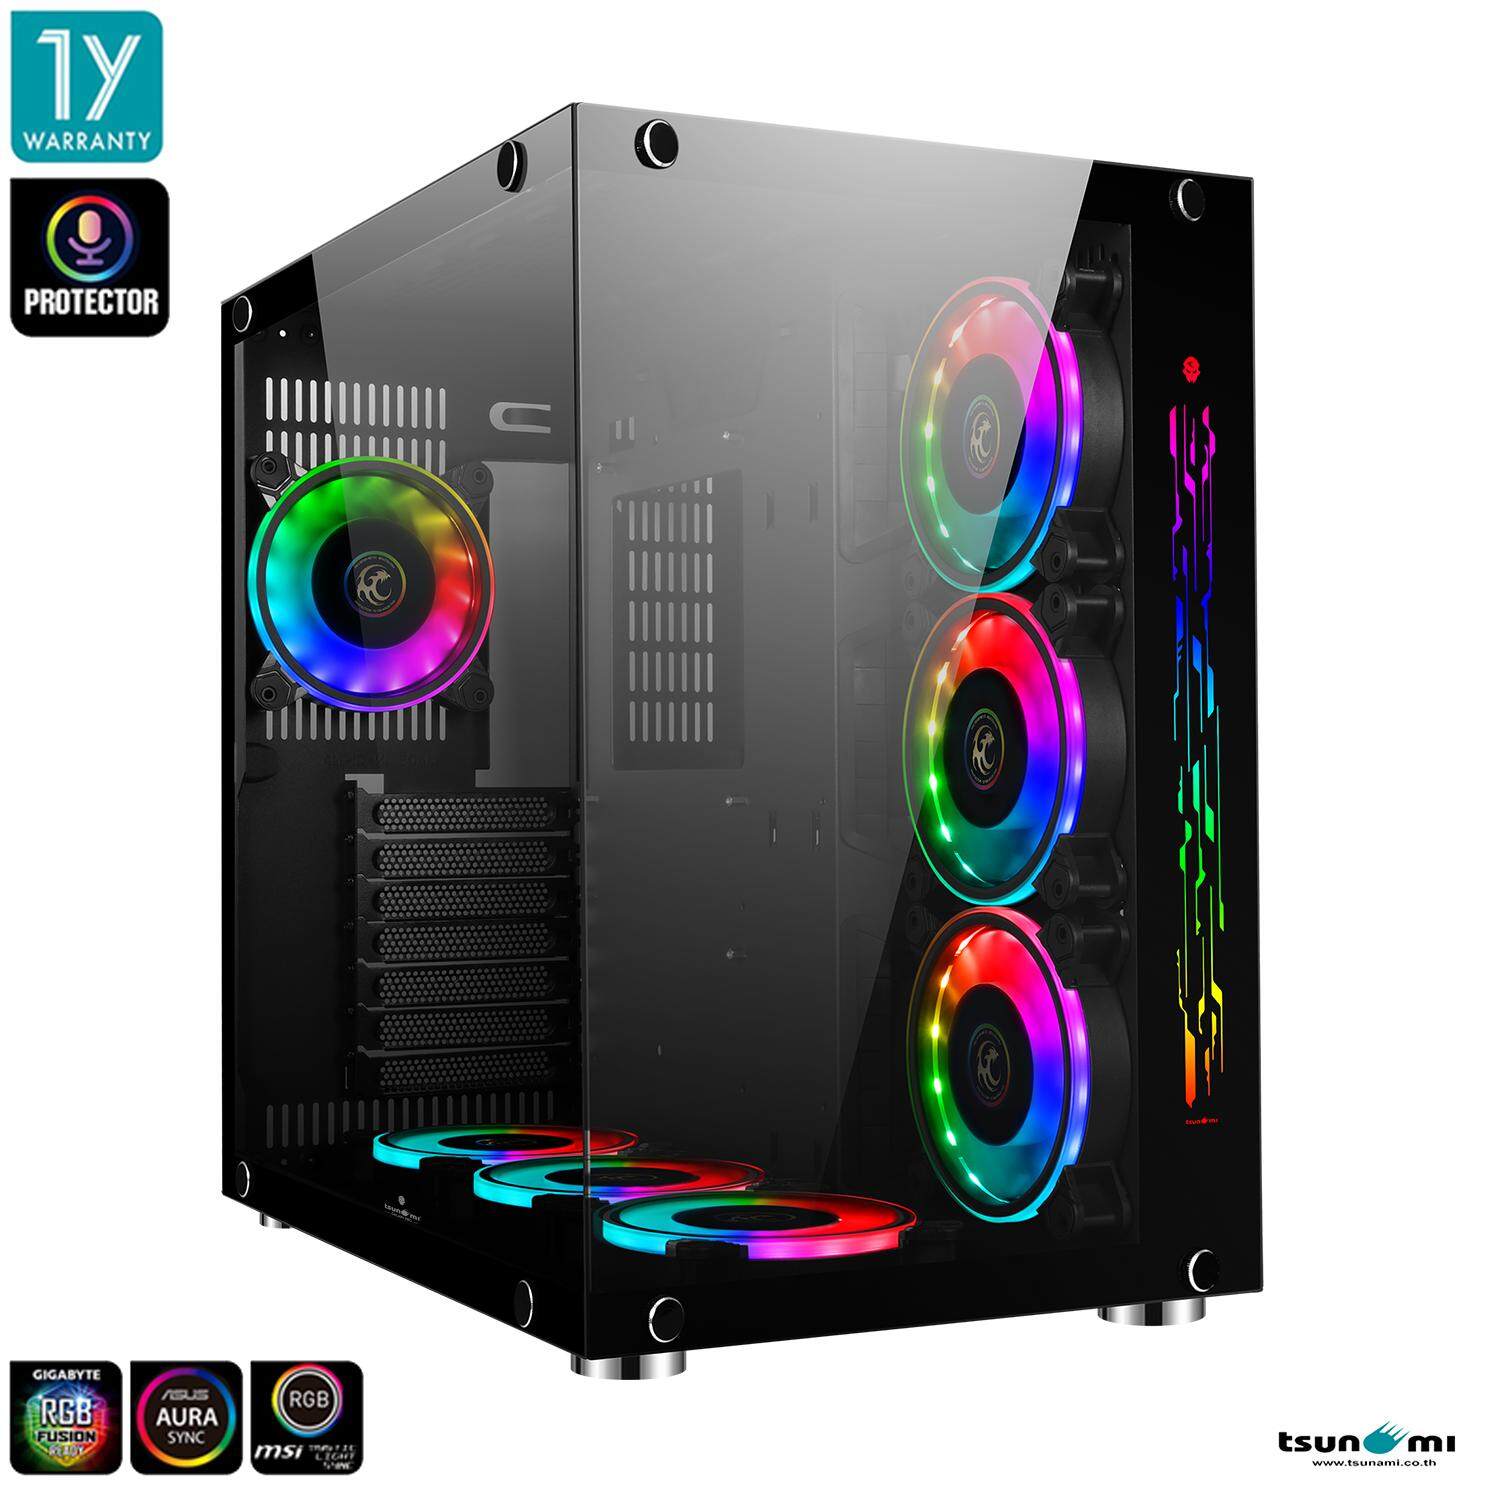 Tsunami Protector Vision Sound Sync ARGB Panorama Tempered Glass ATX Gaming Case with Protector 1262 12CM ARGB Cooling Fan*7